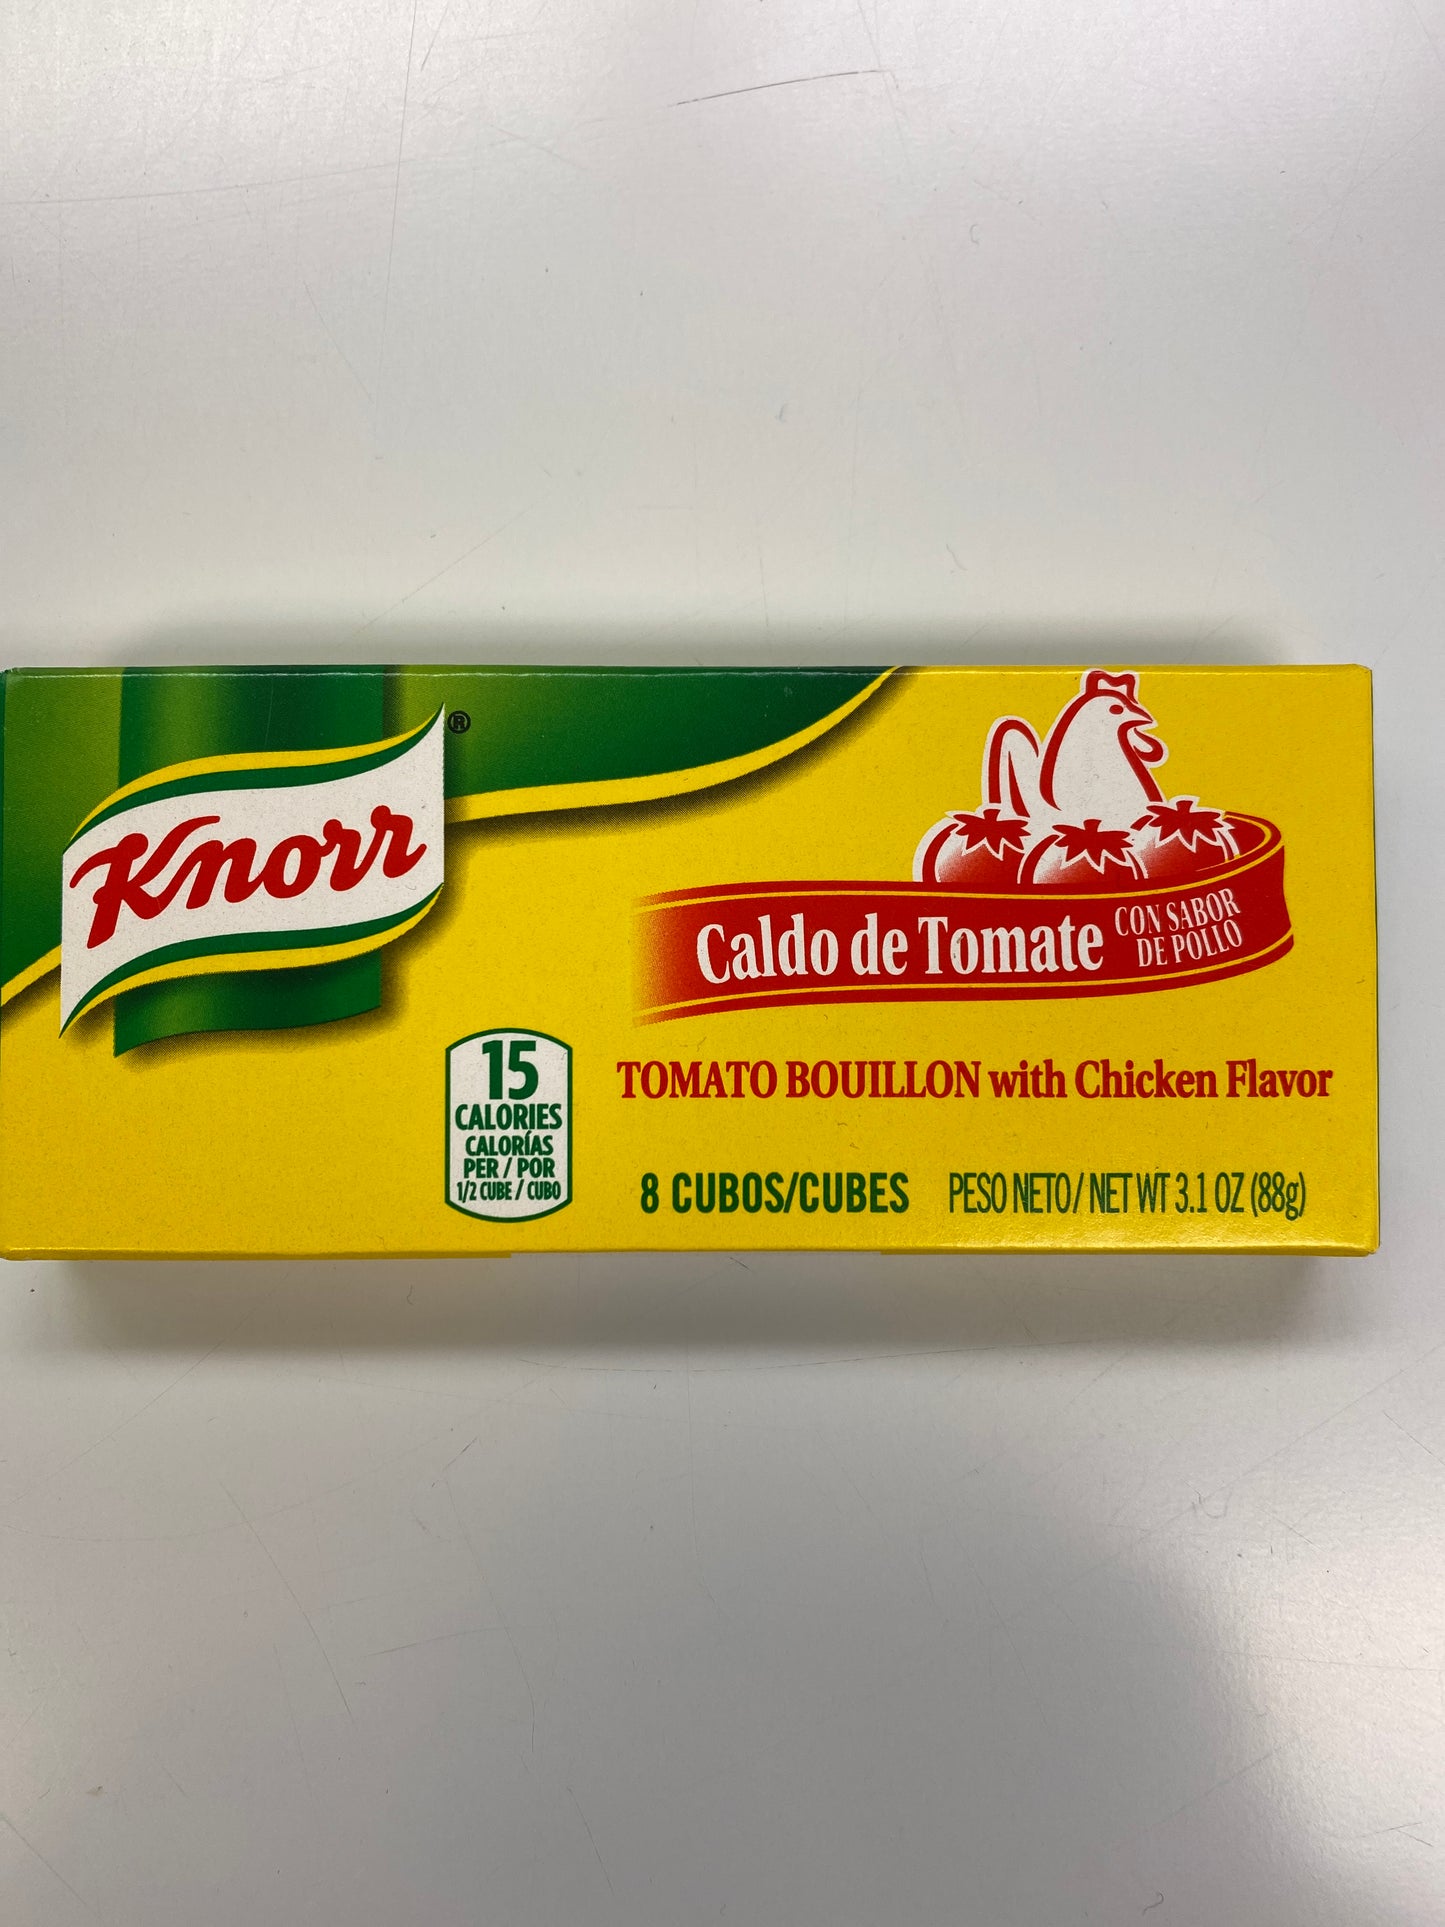 Knorr Tomato Bouillon with Chicken Flavor - 8 cubes